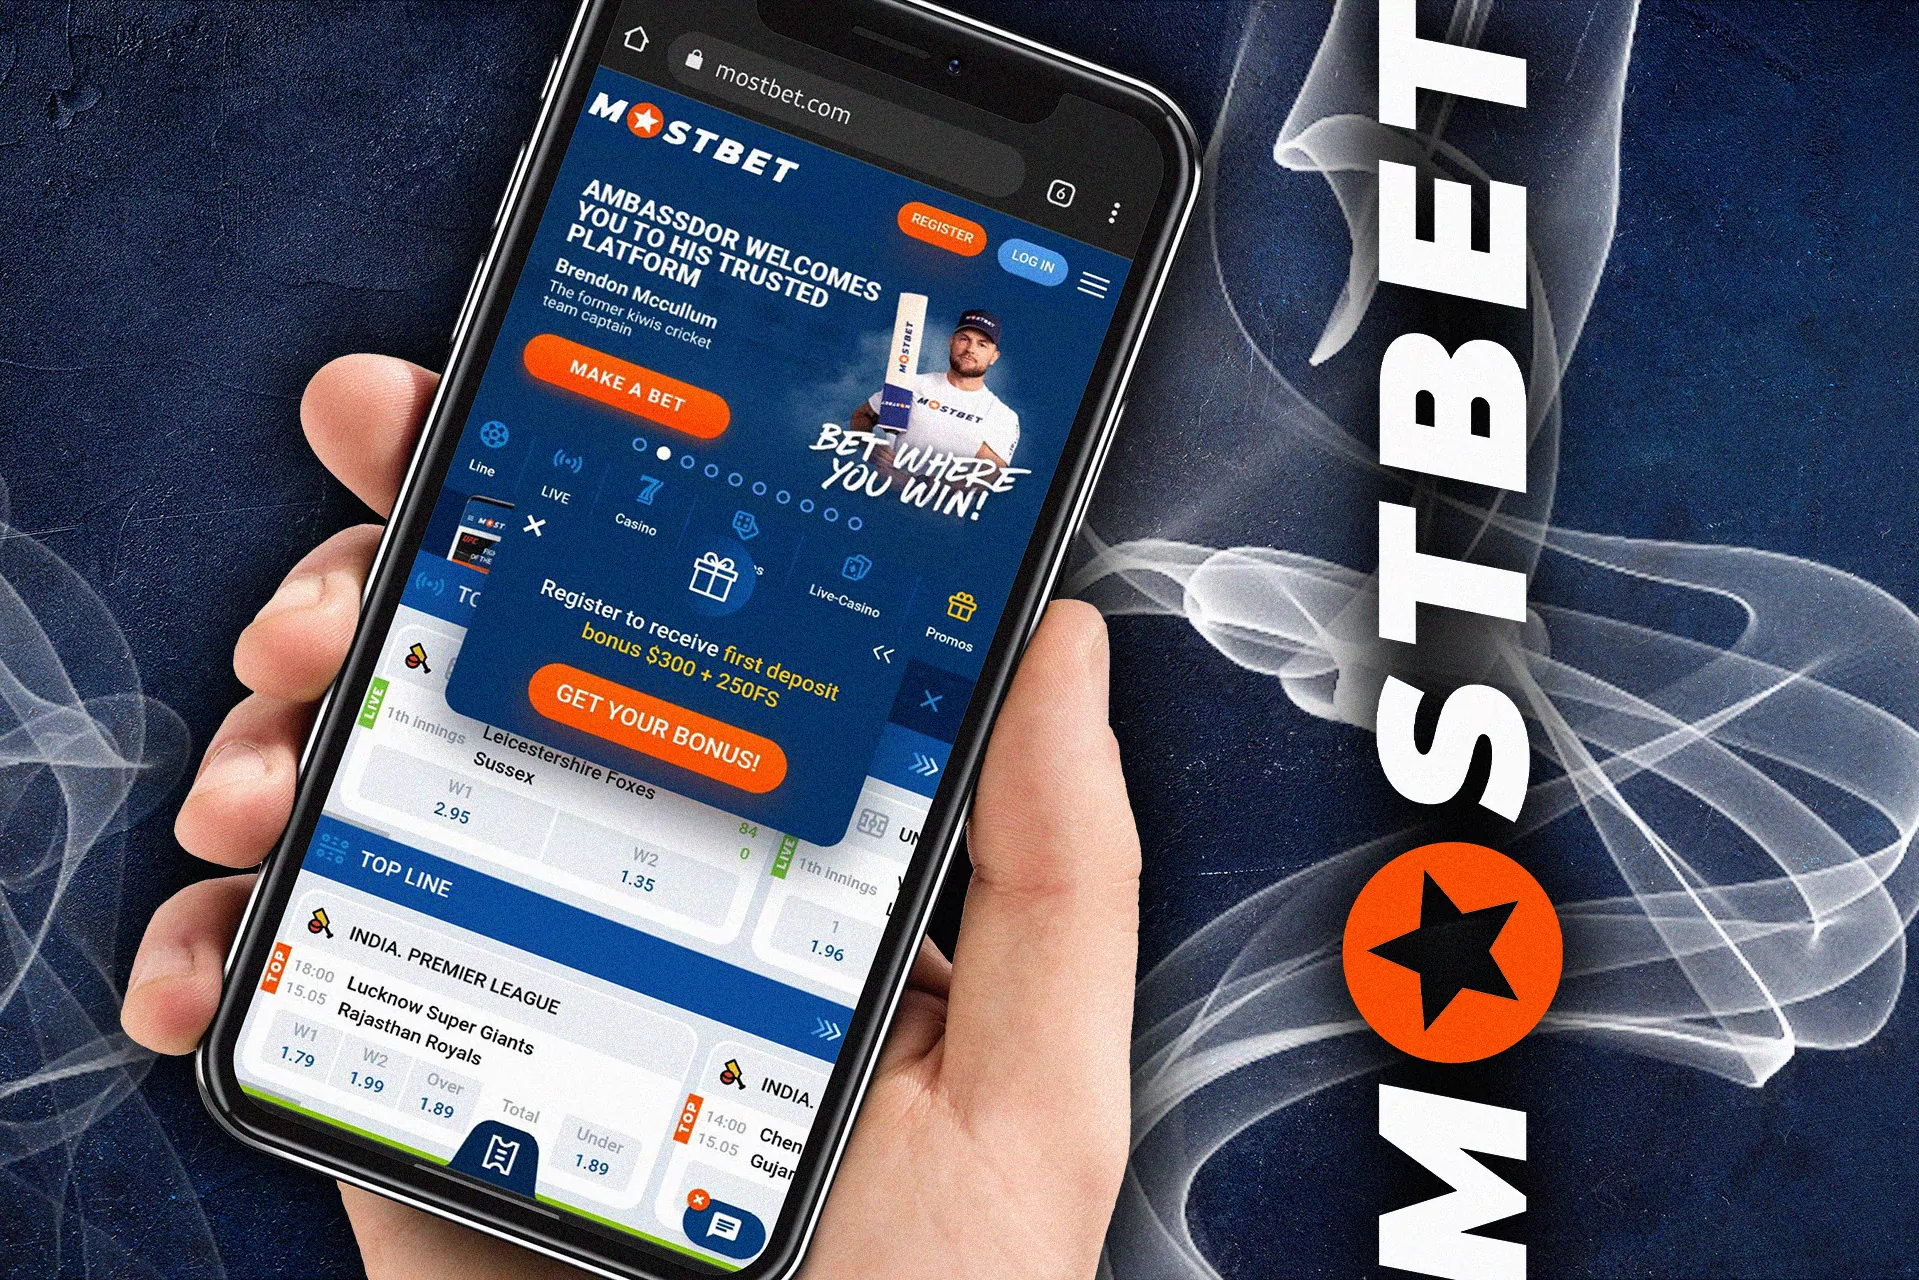 Use the mobile version of the Mostbet website to bet via phone.